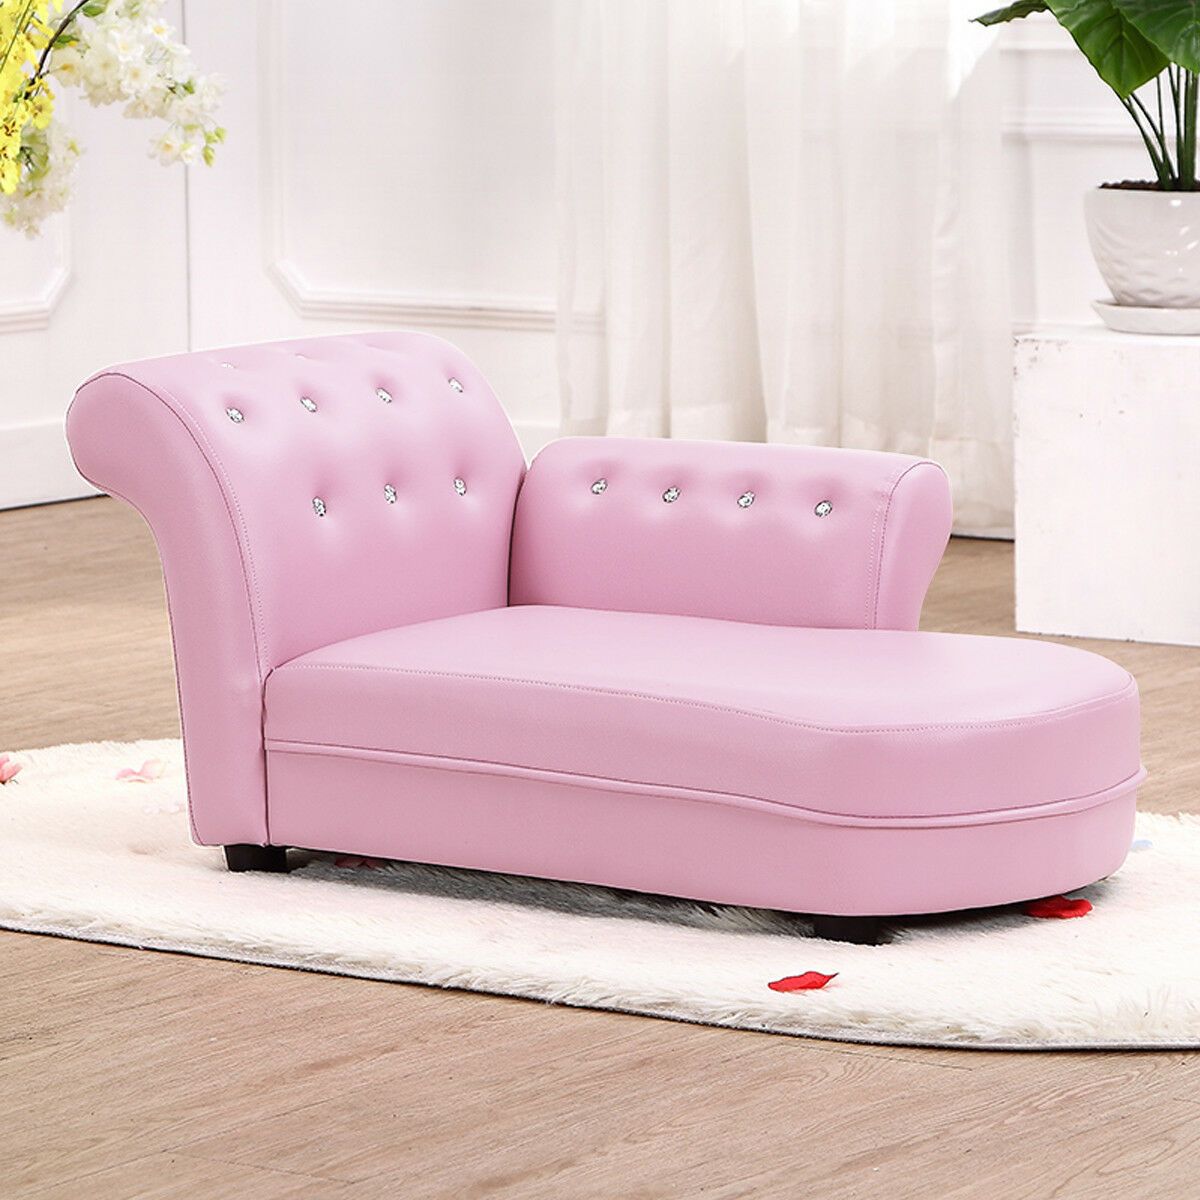 

Maxmass Pink Kids Sofa Chaise Lounge Armrest Chair Relax Couch Bedroom Living Room